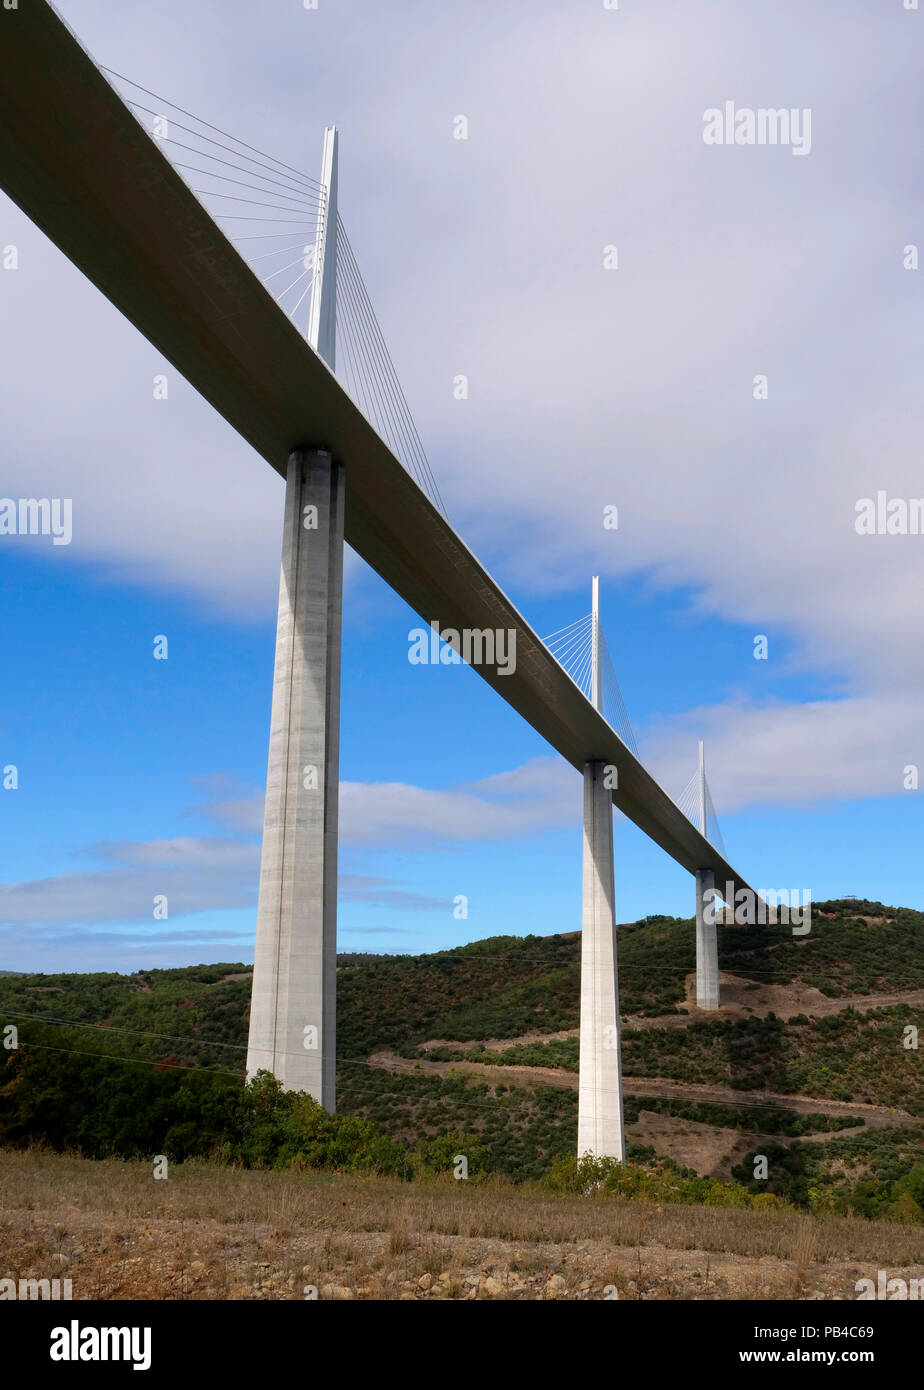 The Millau Viaduct over the Tarn River gorge near Millau in southern France. The Bridge carries the A75 autoroute. Stock Photo